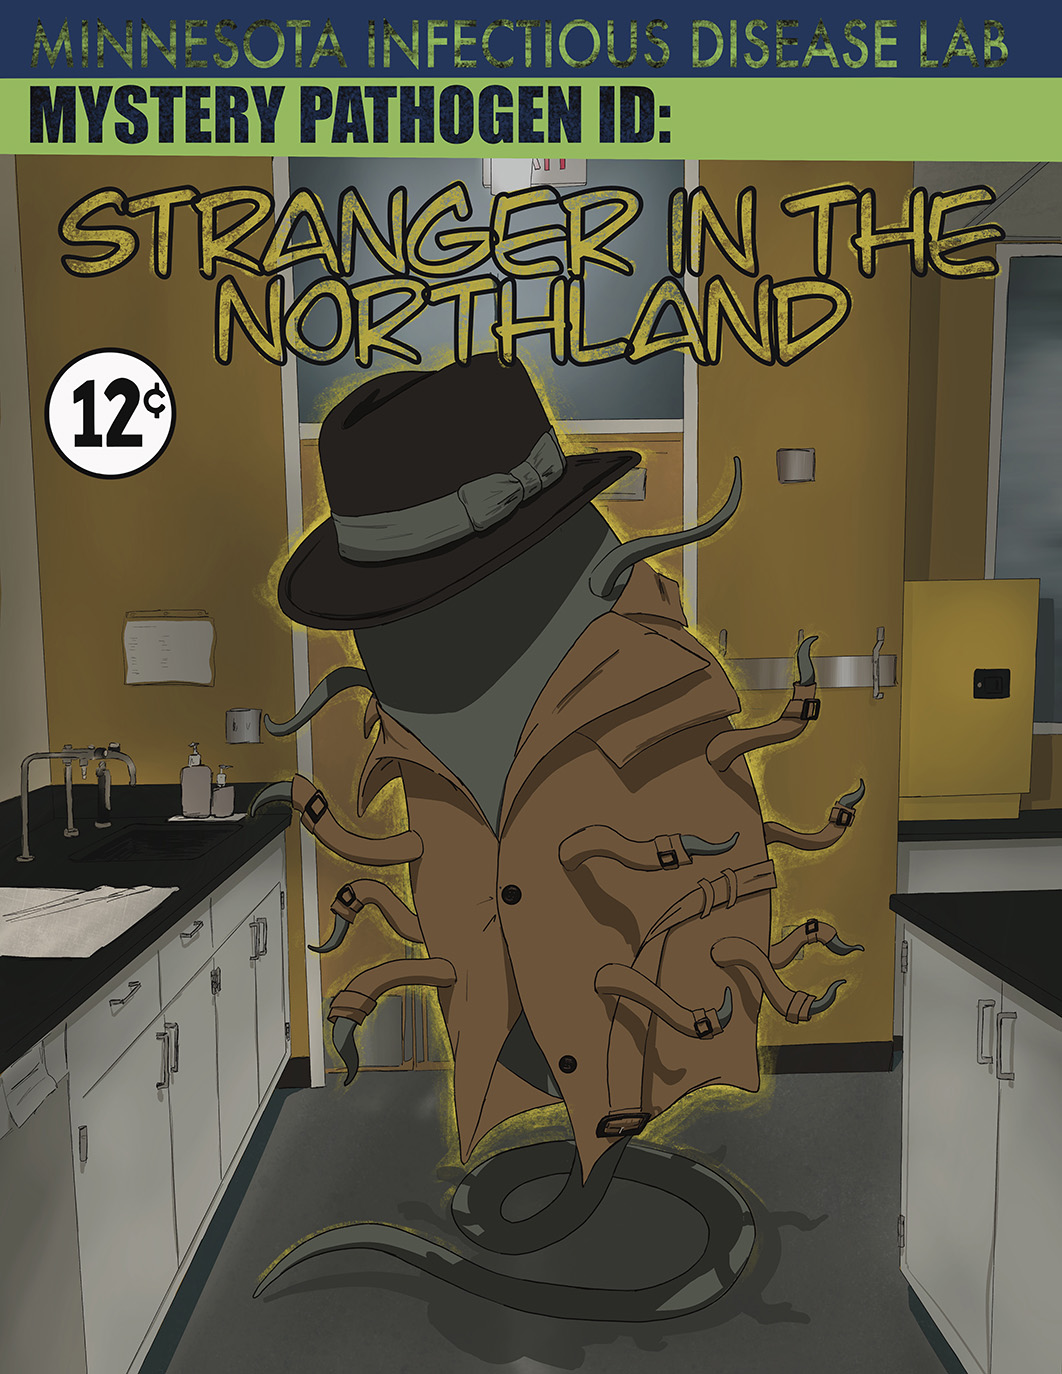 Stranger in the Northland comic cover: sinister looking large microbe shape with multiple arms and a tail, wearing an old-fashion trench coat and fedora hat, shading its face. The microbe is entering a science lab, lab benches and sinks are surrounding it on either side. Comic book price is twelve cents. width=